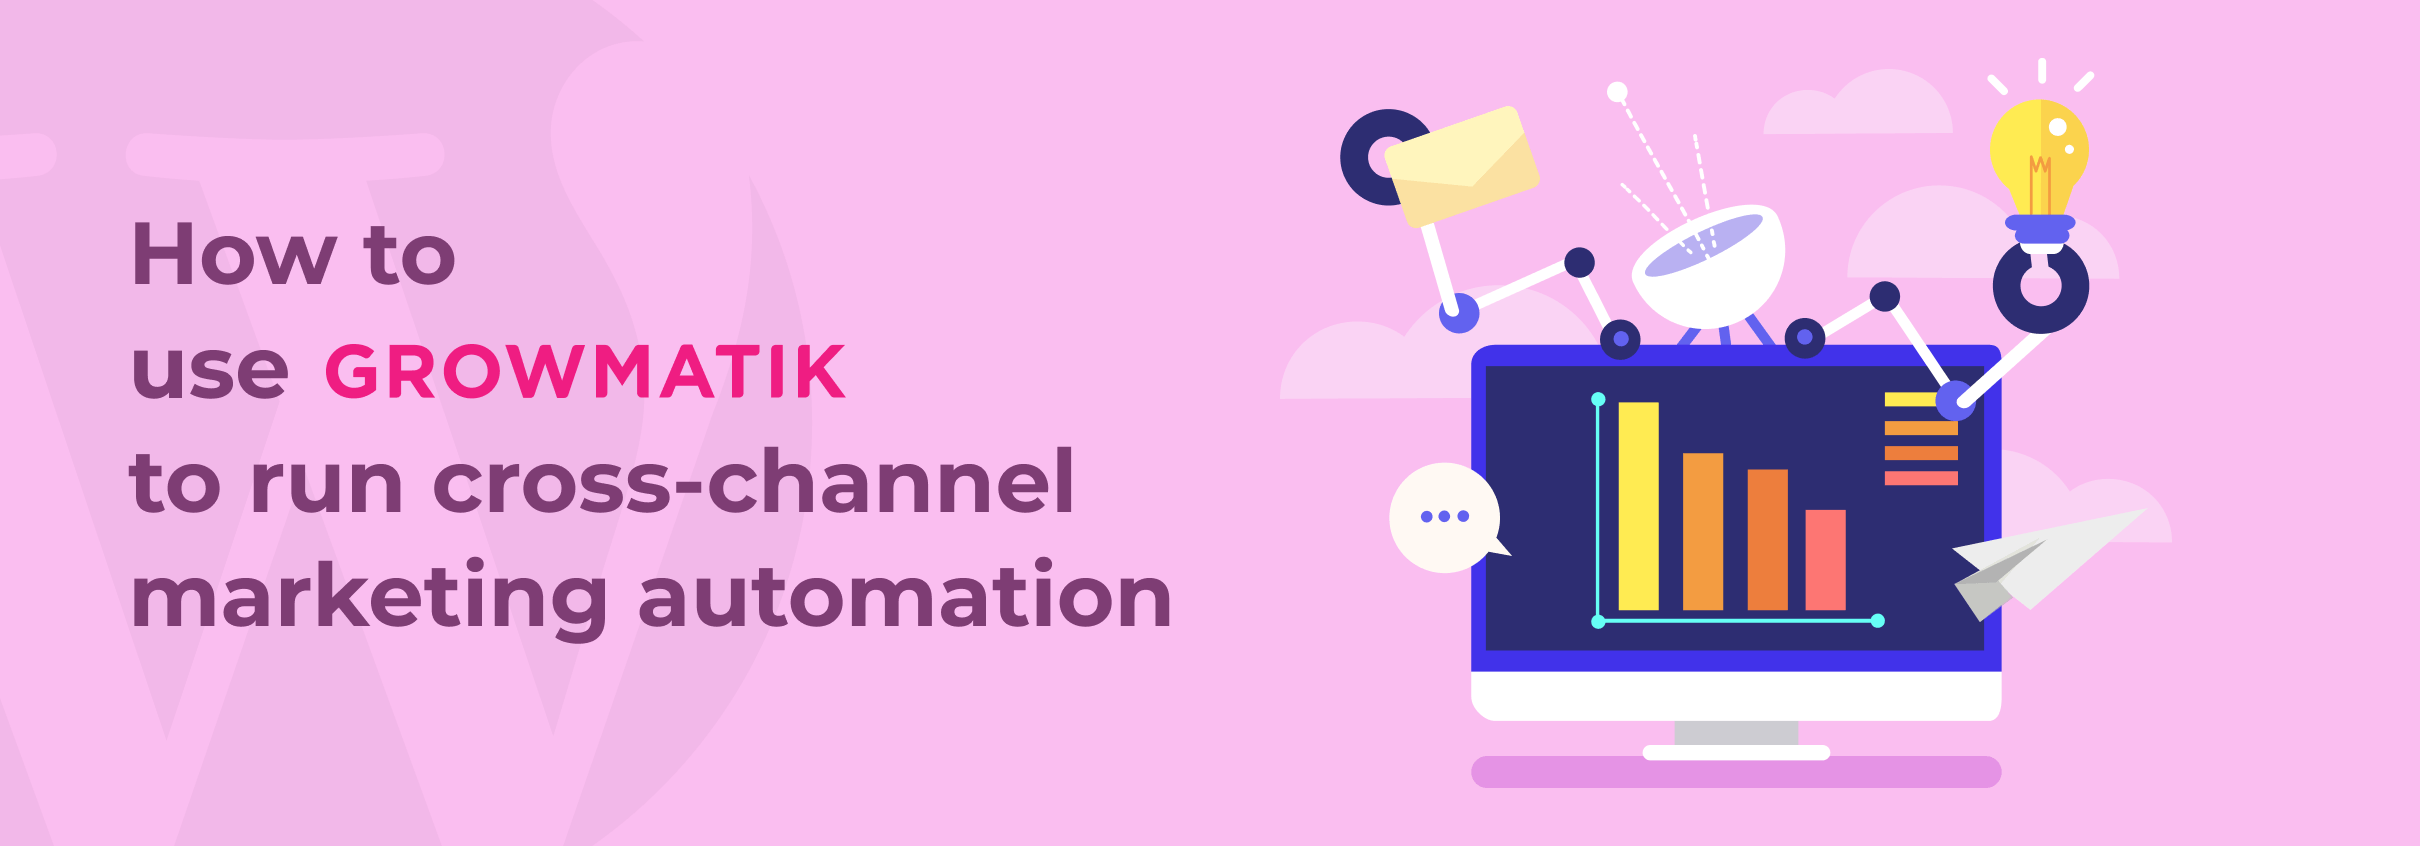 How to use Growmatik to run cross-channel marketing automation for WooCommerce